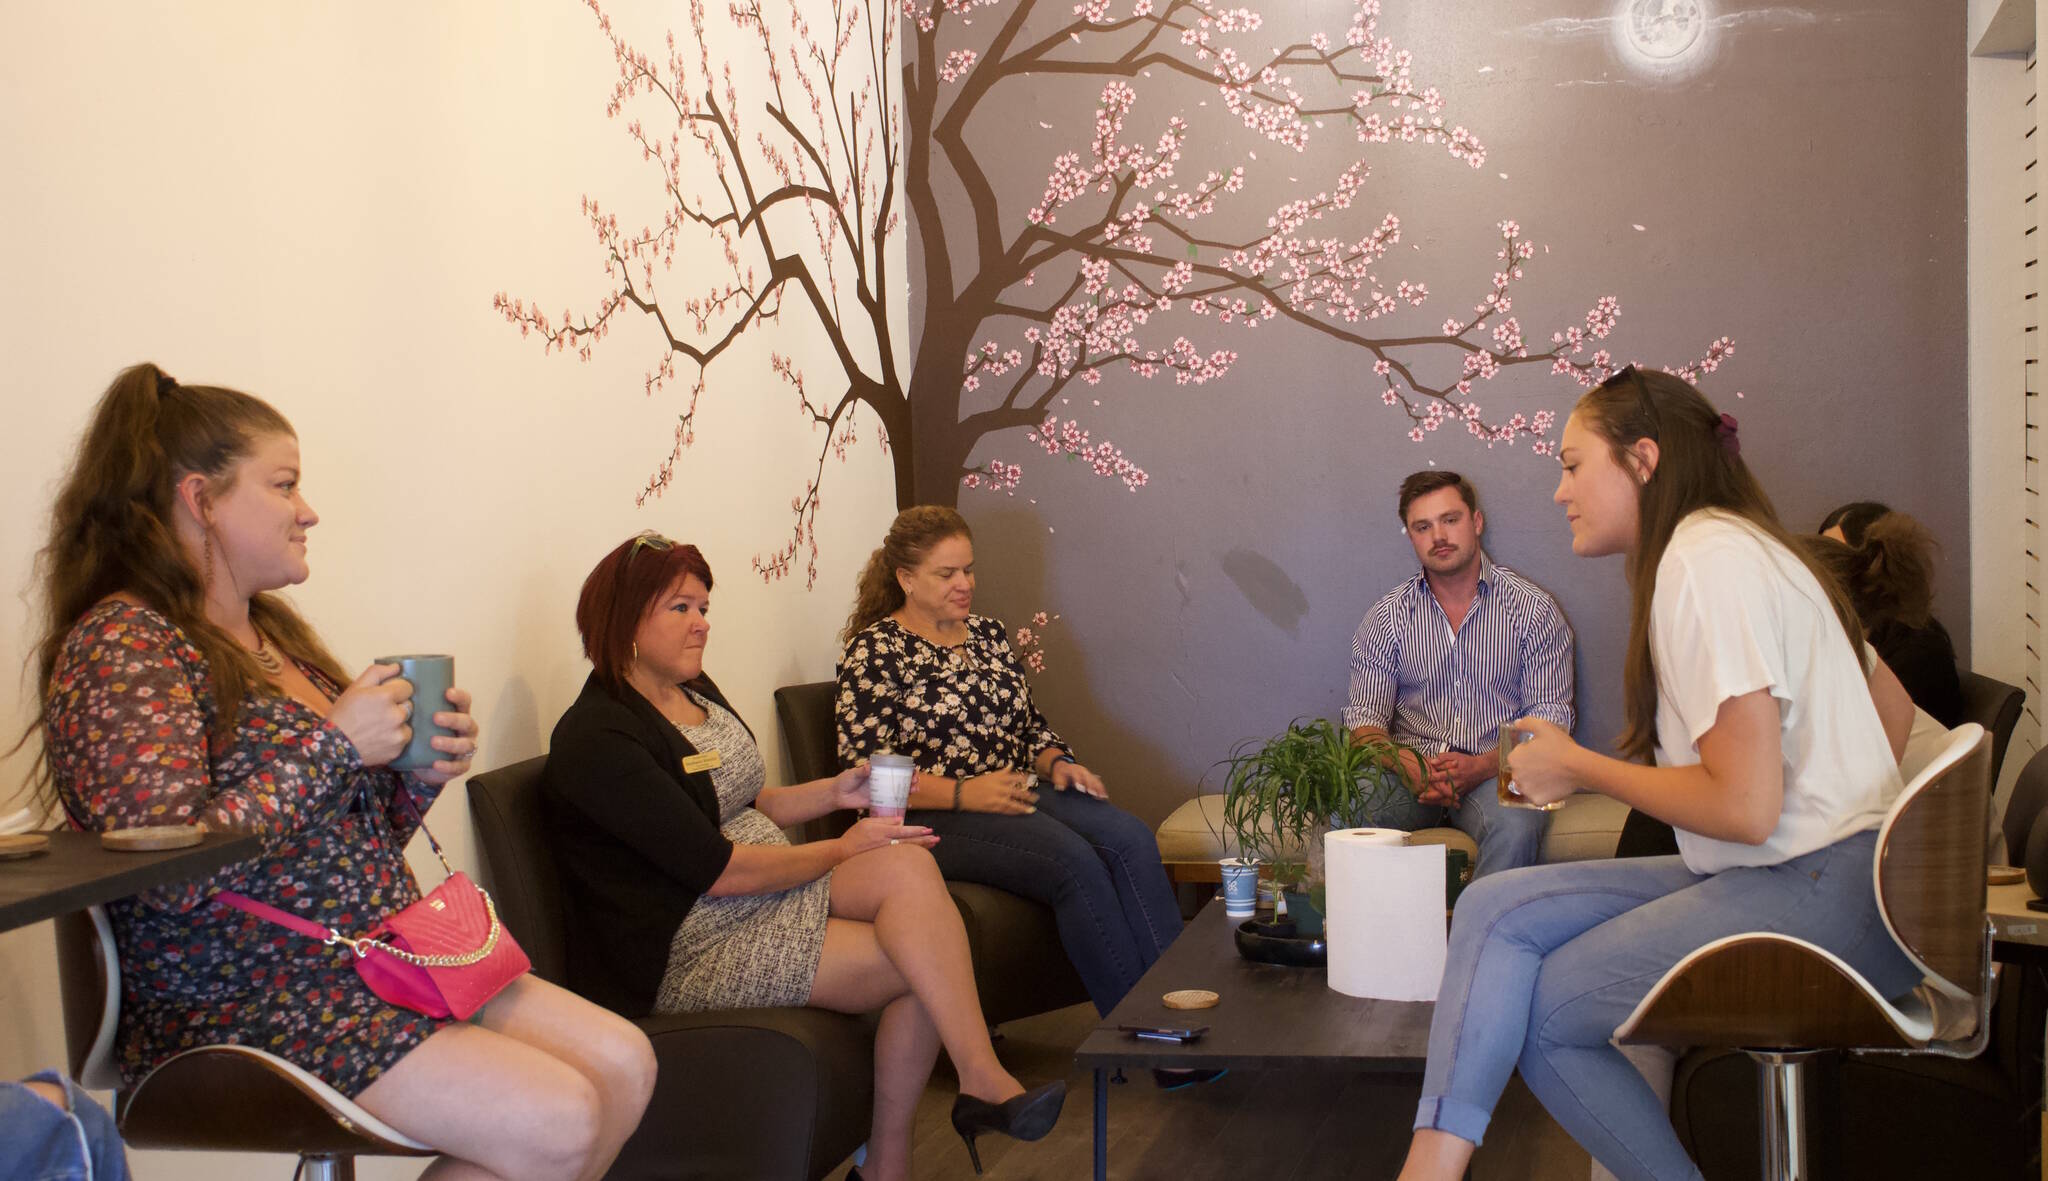 The Whidbey Young Professionals recently had a morning tea talk and networking event at the Hidden Gem in Oak harbor. (Photo by Rachel Rosen/Whidbey News-Times)